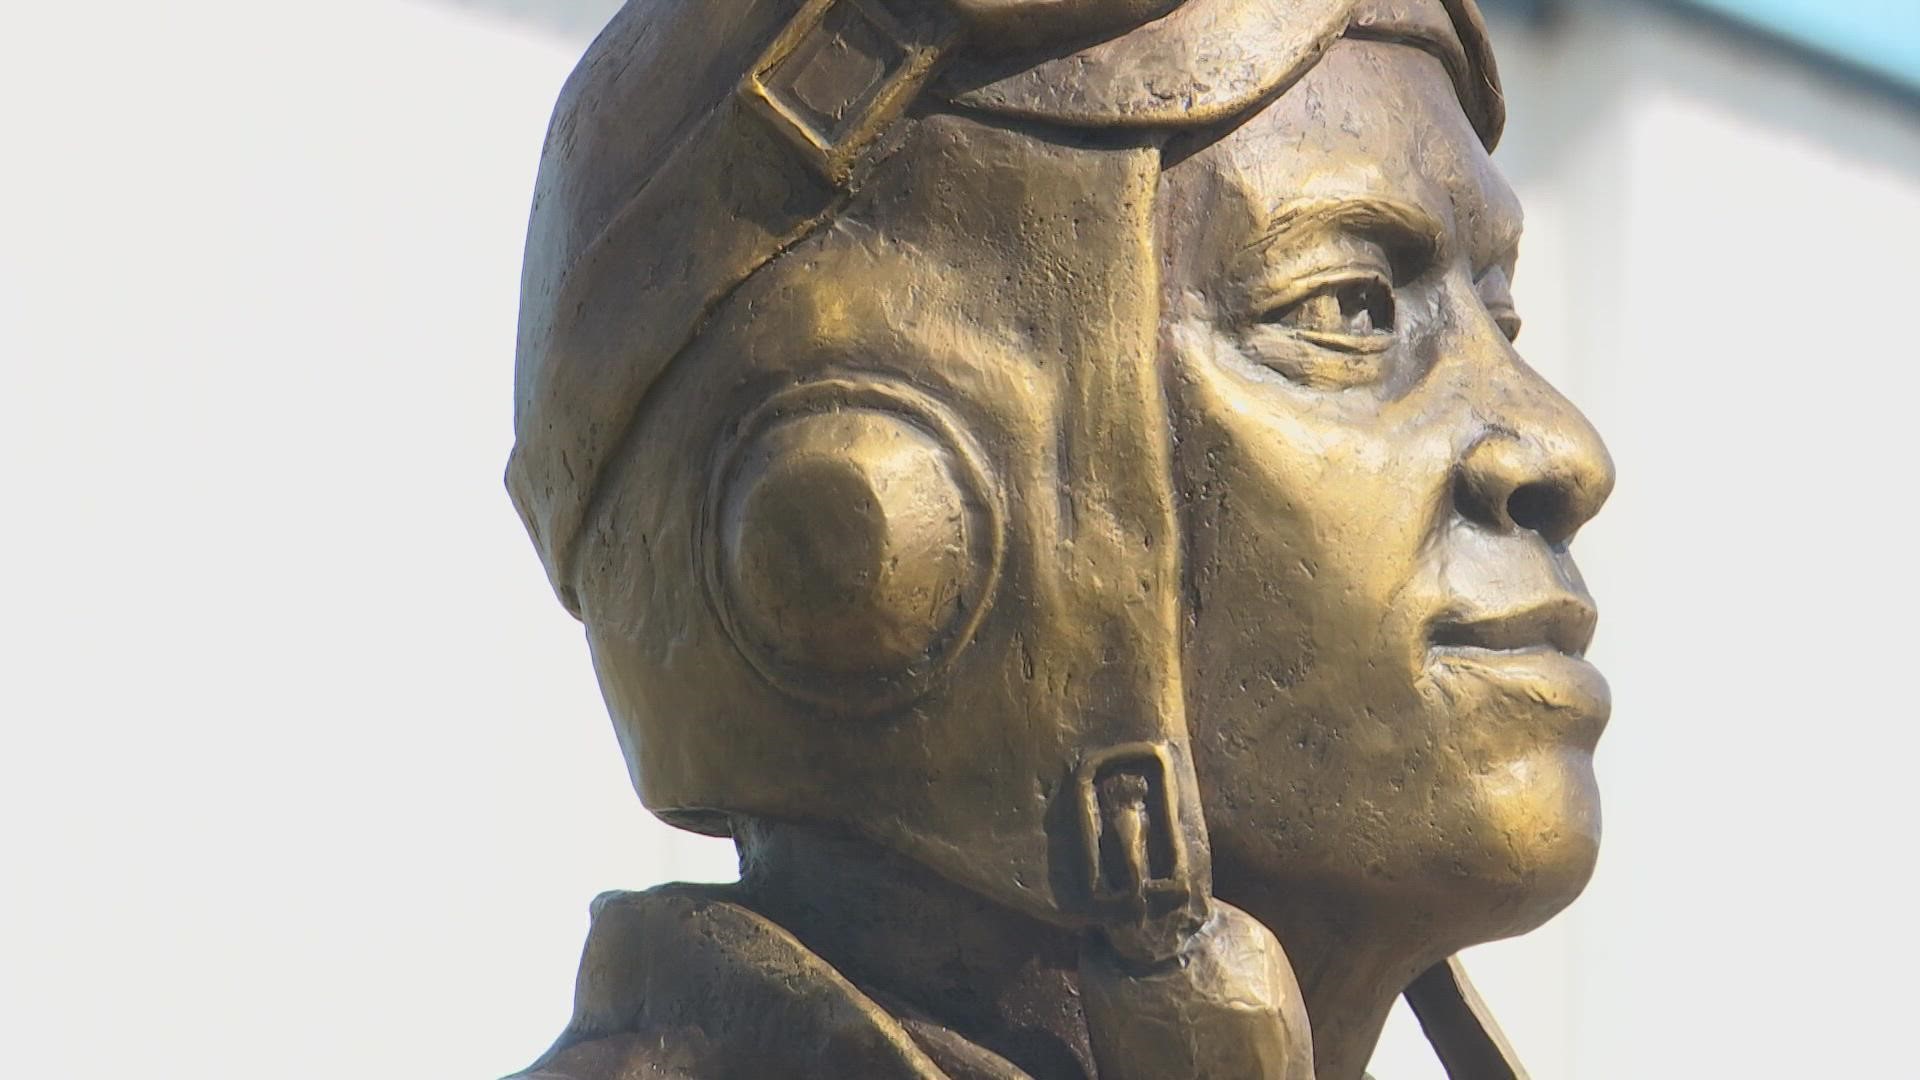 Black American officers who fought racism in the airforce were honored Saturday in Seymour with a statue unveiling.